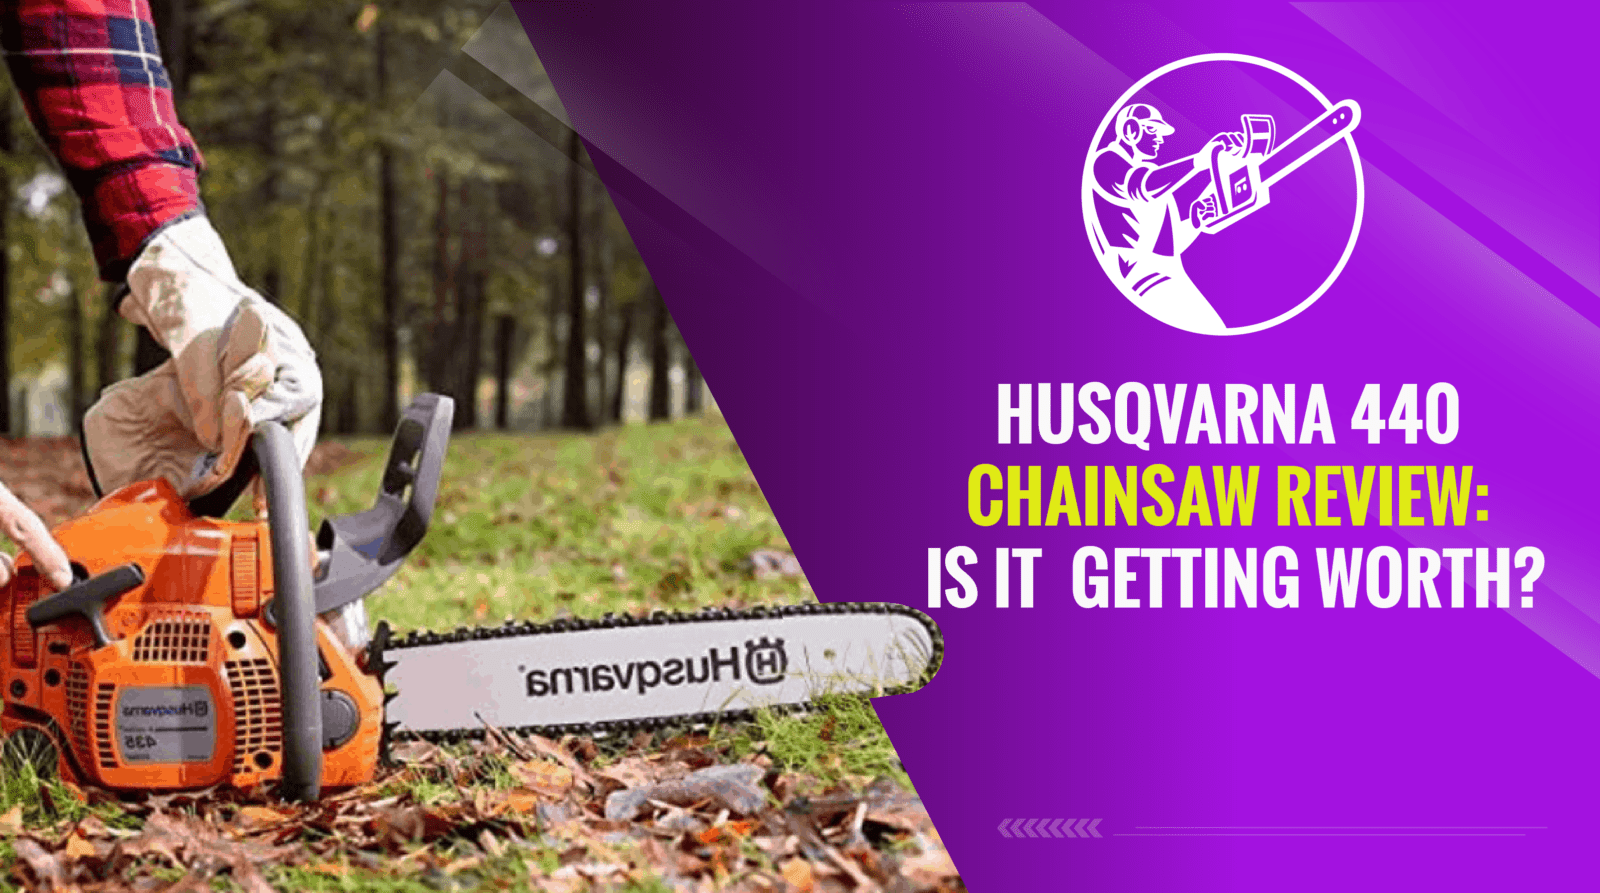 Husqvarna 440 Chainsaw Review: Is It  Getting Worth?